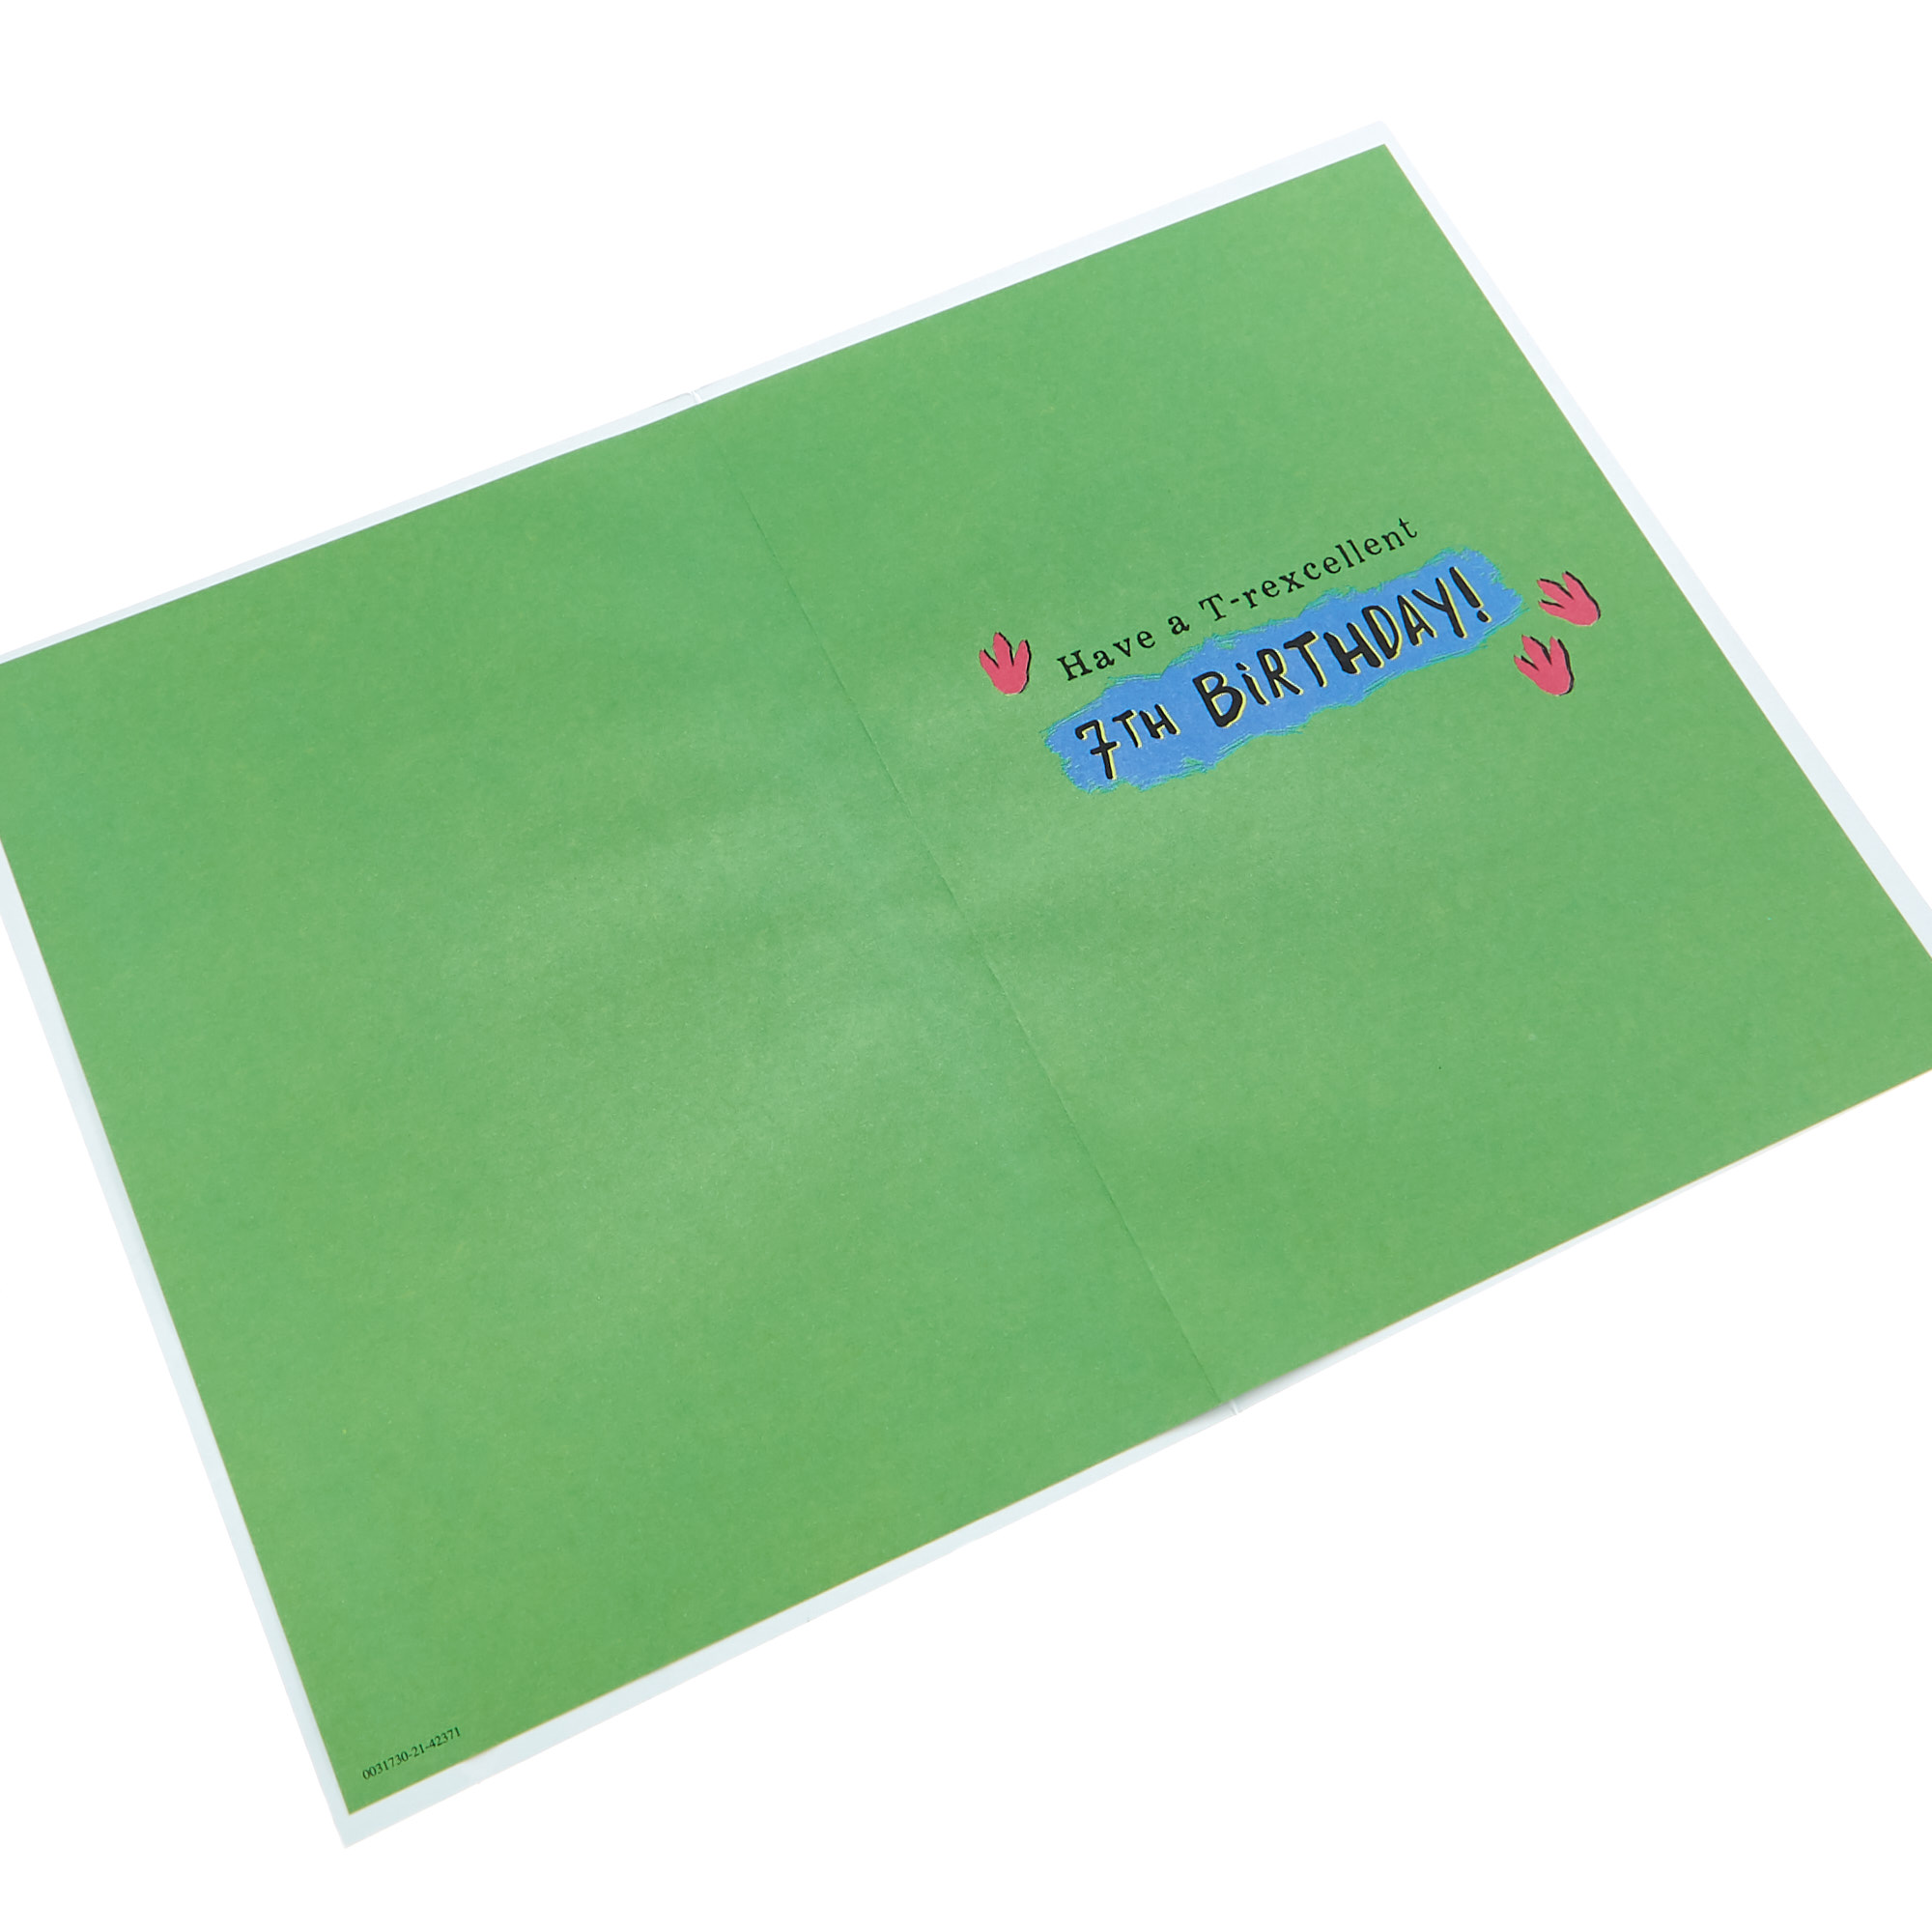 Personalised Congratulations Card - You Made It Look Easy